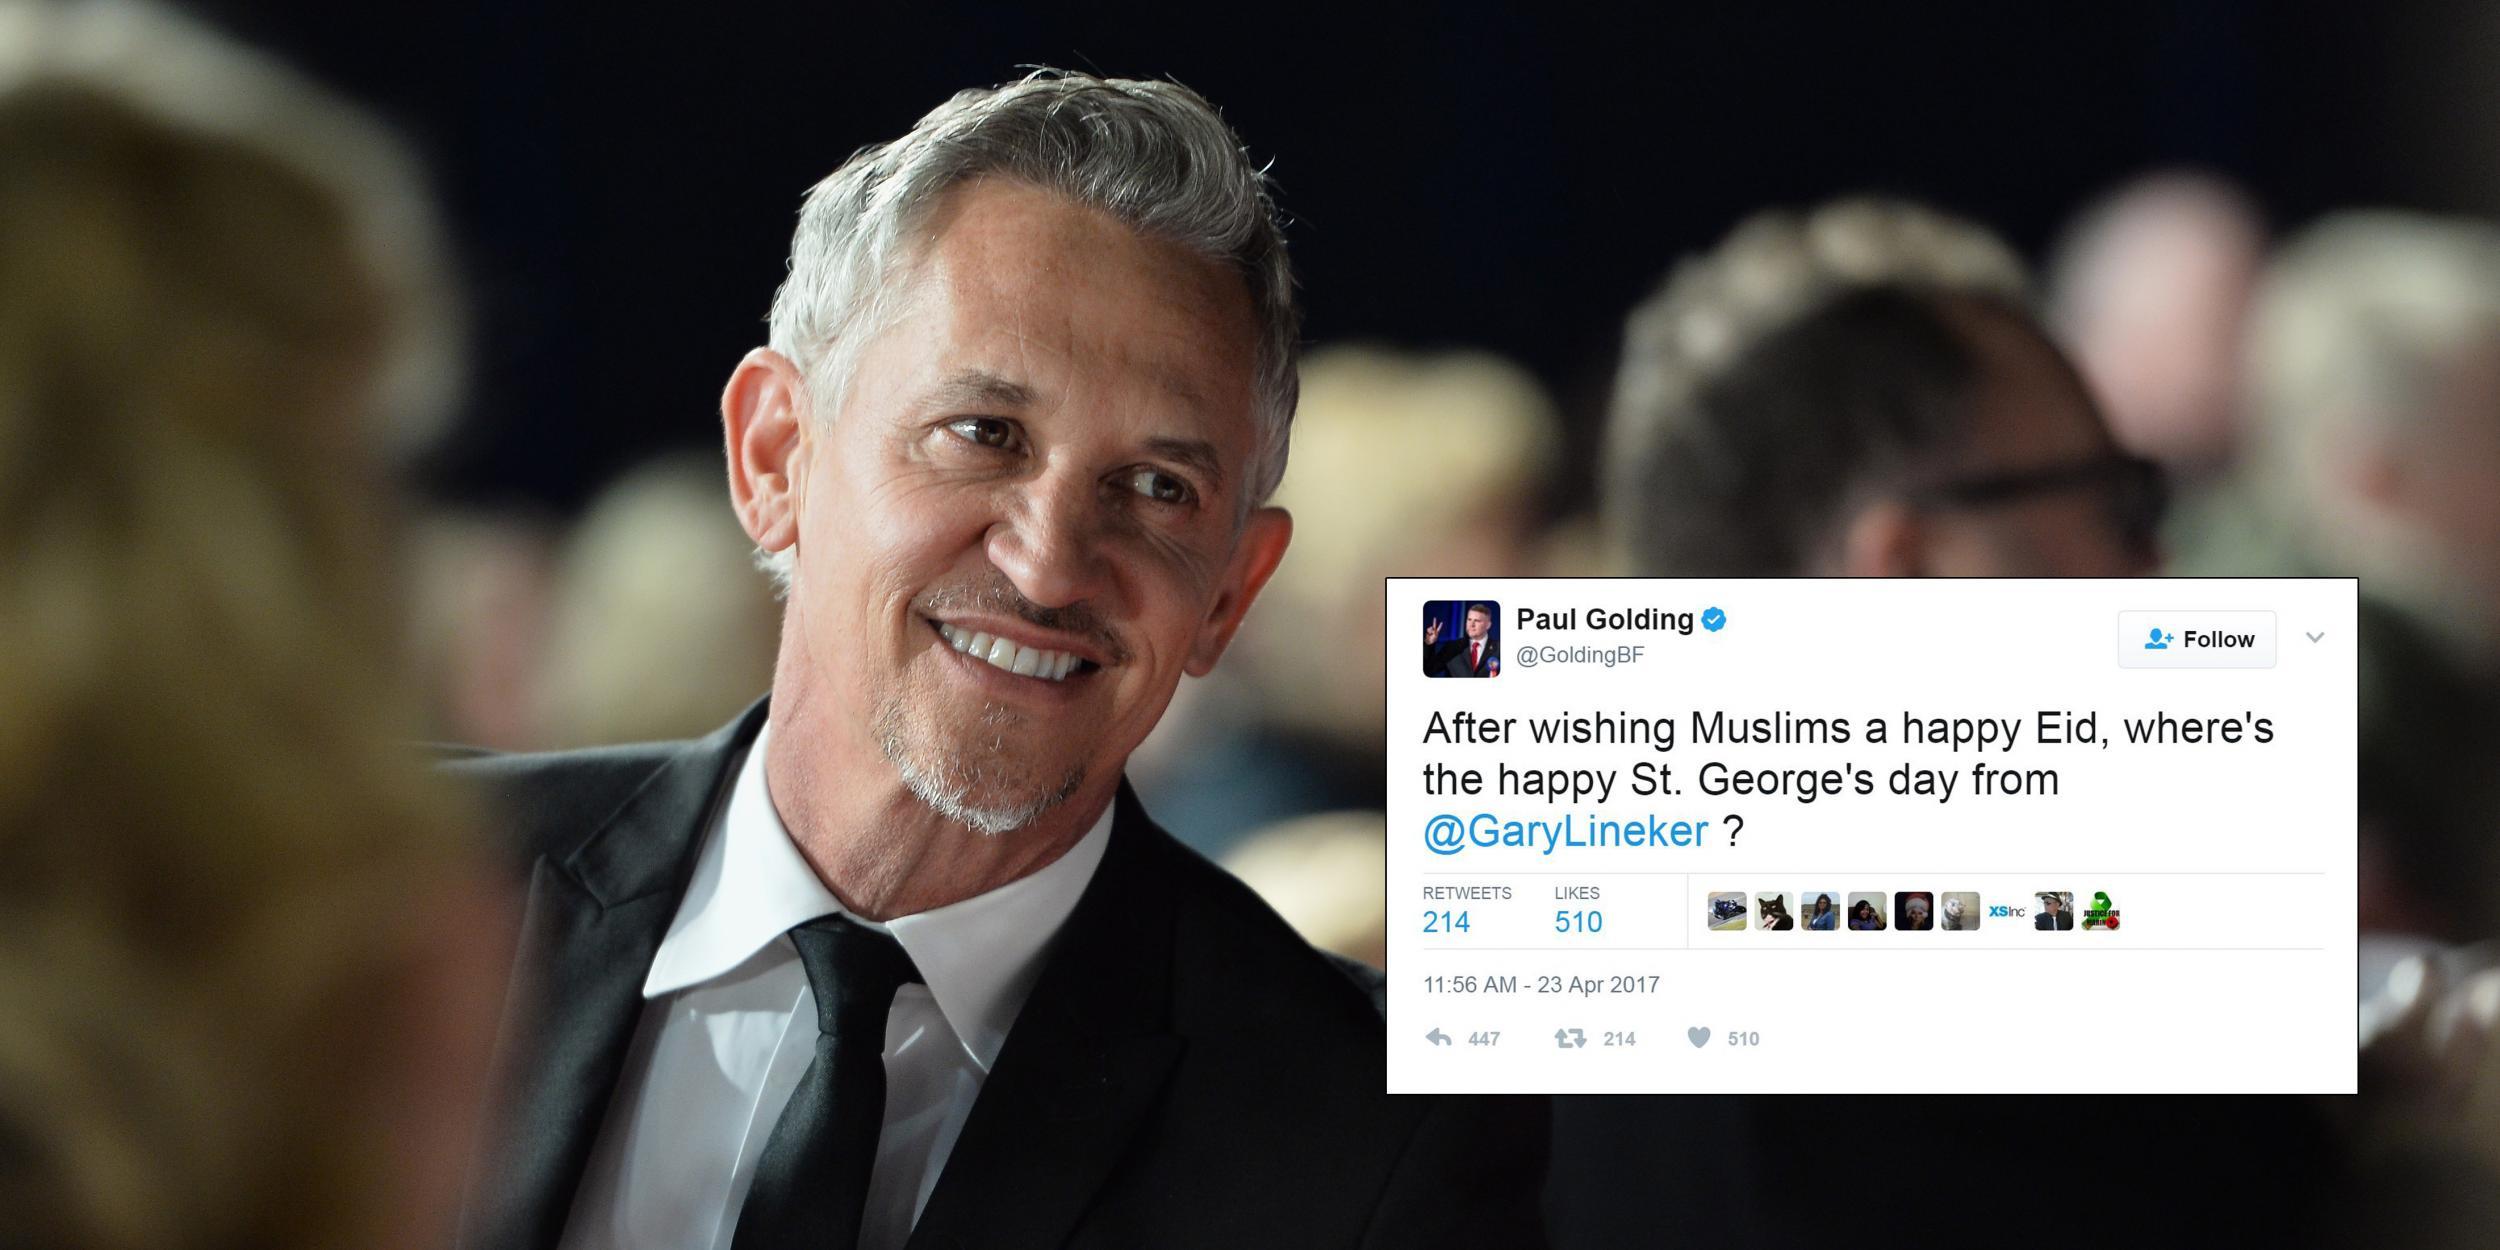 Britain First tried to take down Gary Lineker and he had an incredible response - The indy100